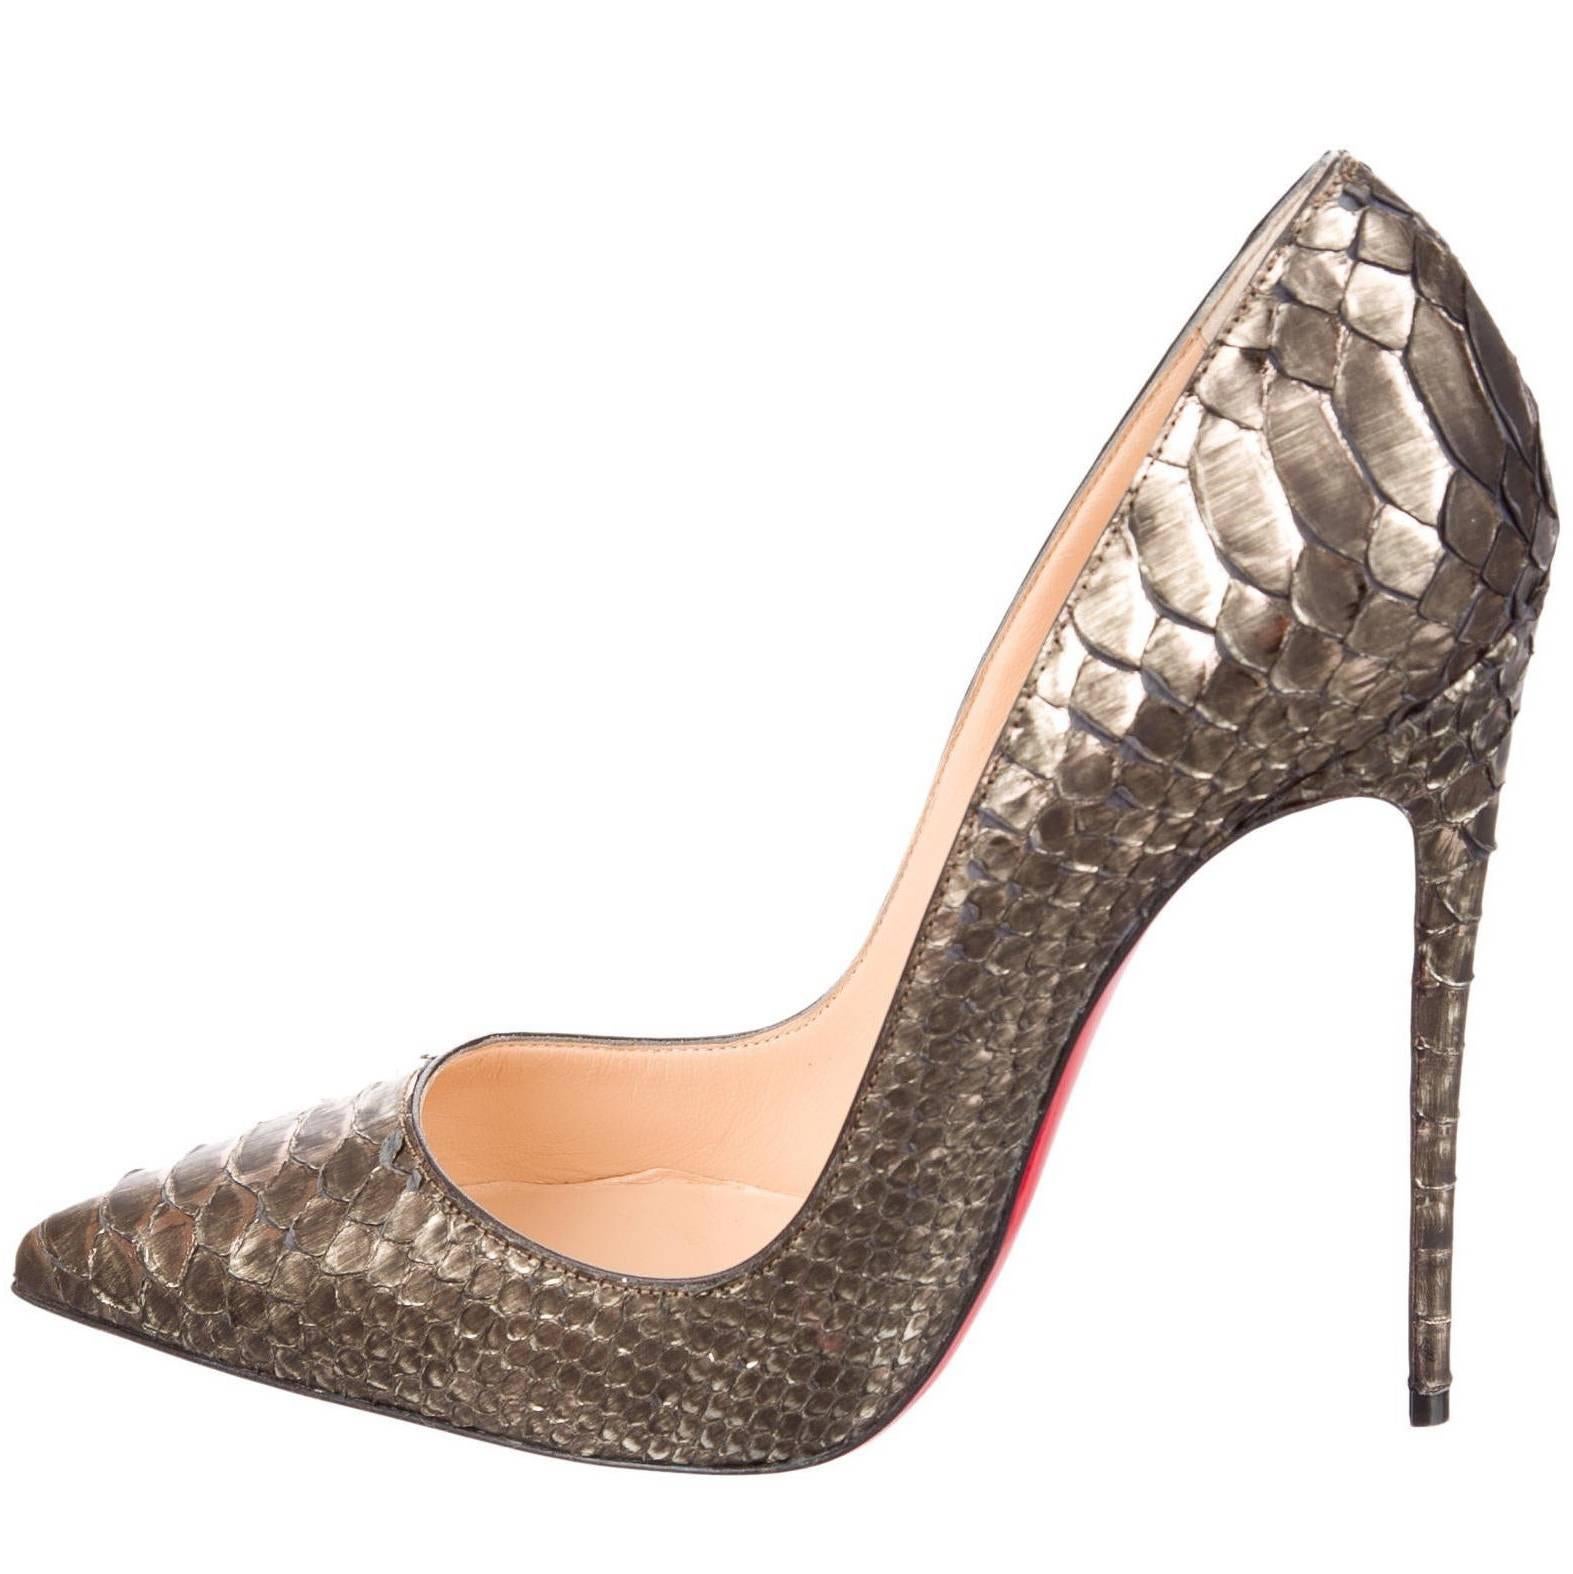 Christian Louboutin New Sold Out Python Snakeskin So Kate High Heels Pumps W/Box